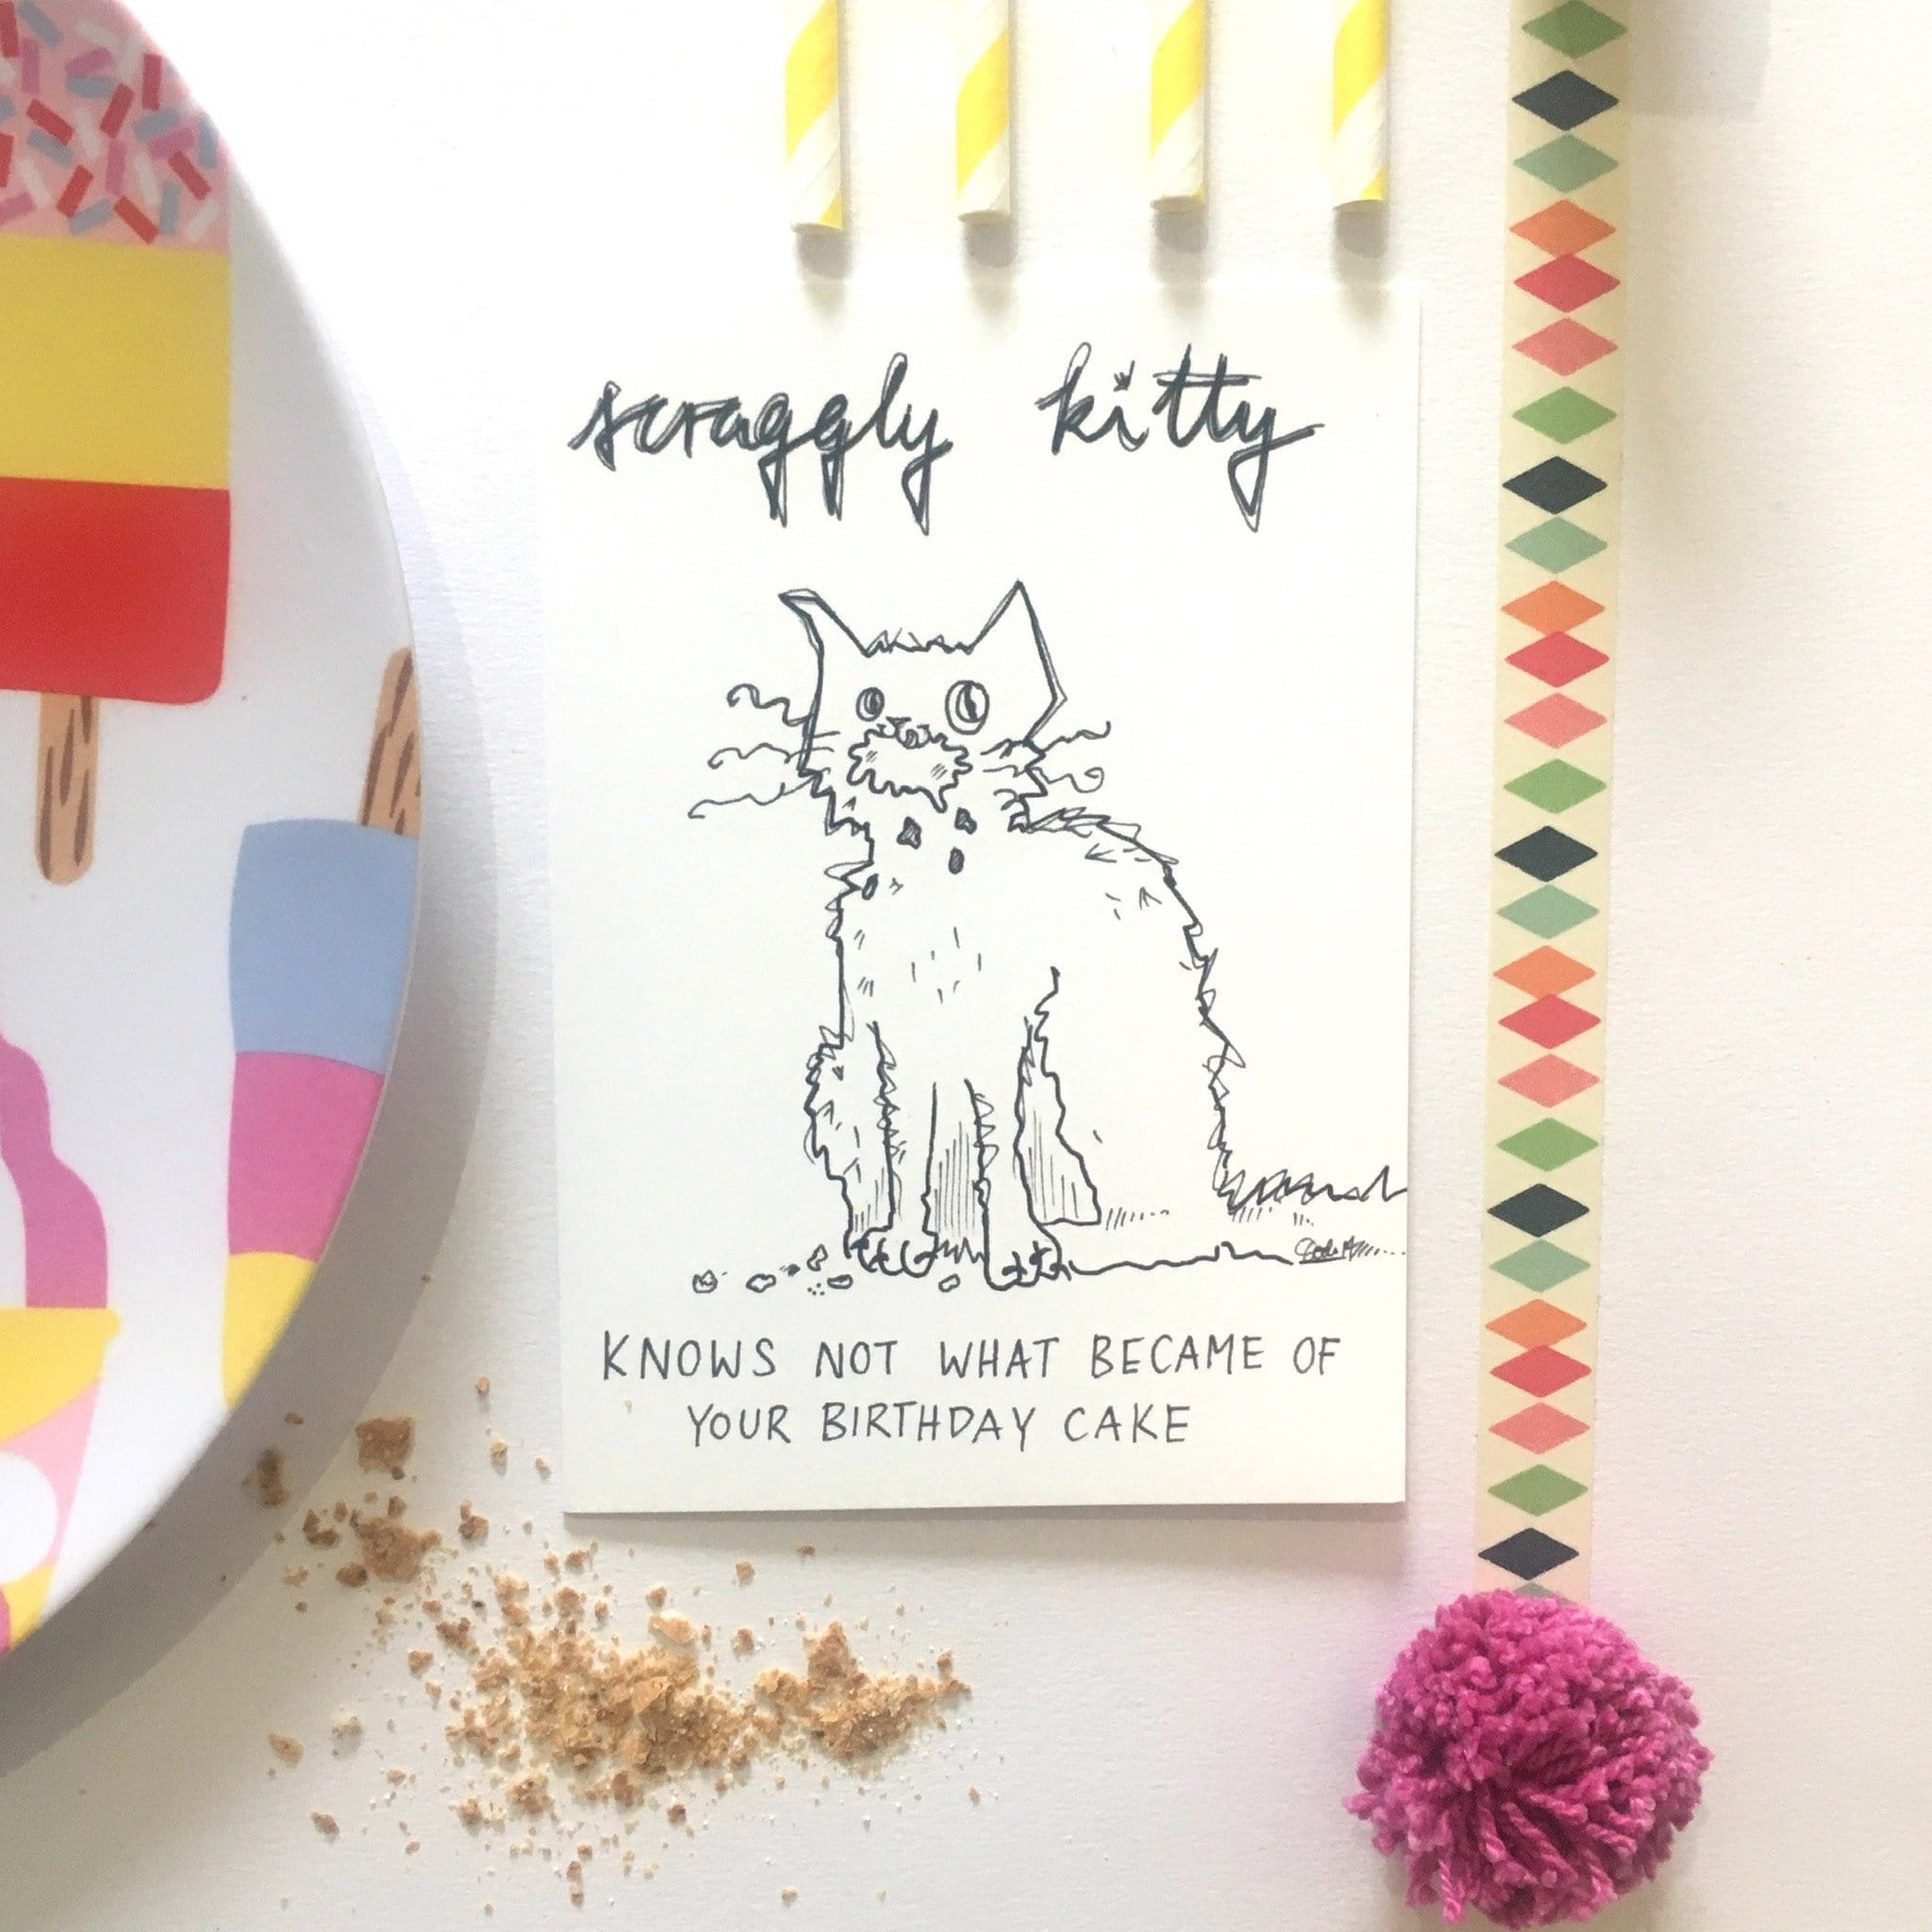 Scraggly Kitty Knows Not What Became Of Your Birthday Cake Greeting Card Scraggly Kitty Greeting Cards Card